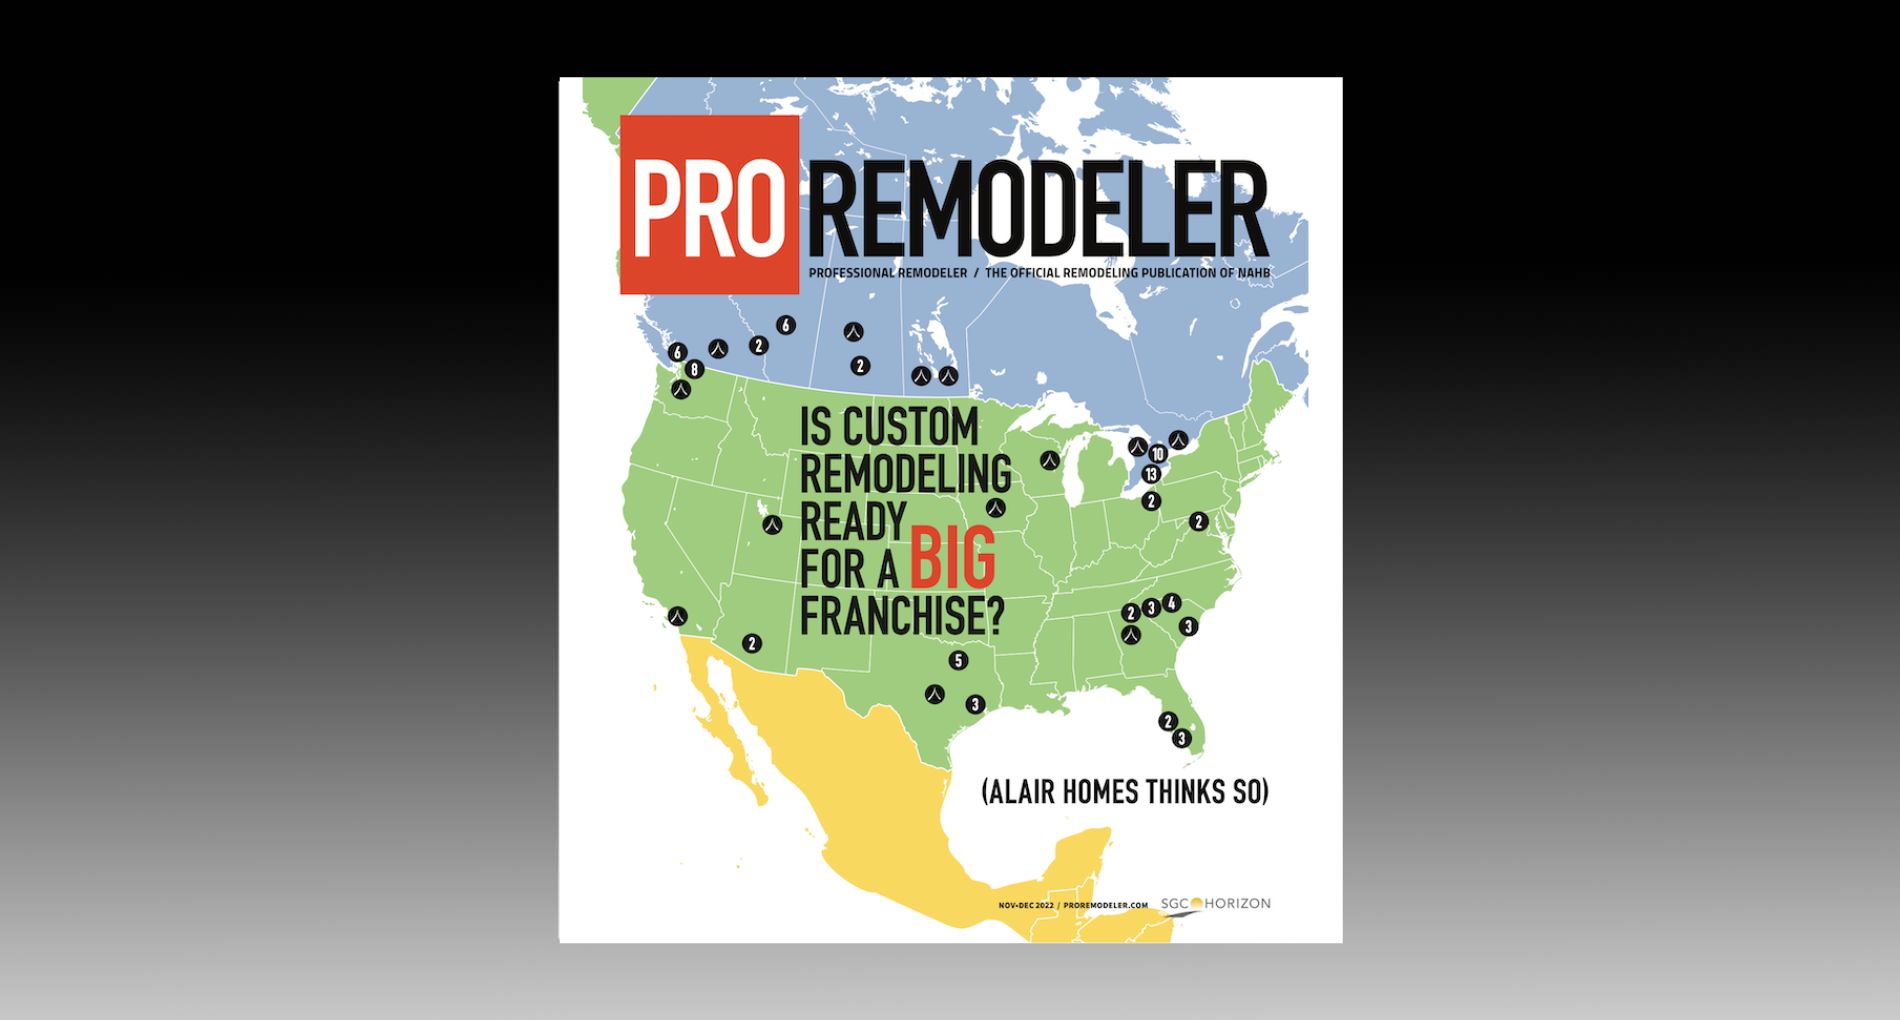 ProRemodeler: Is Custom Remodeling Ready for Alair?